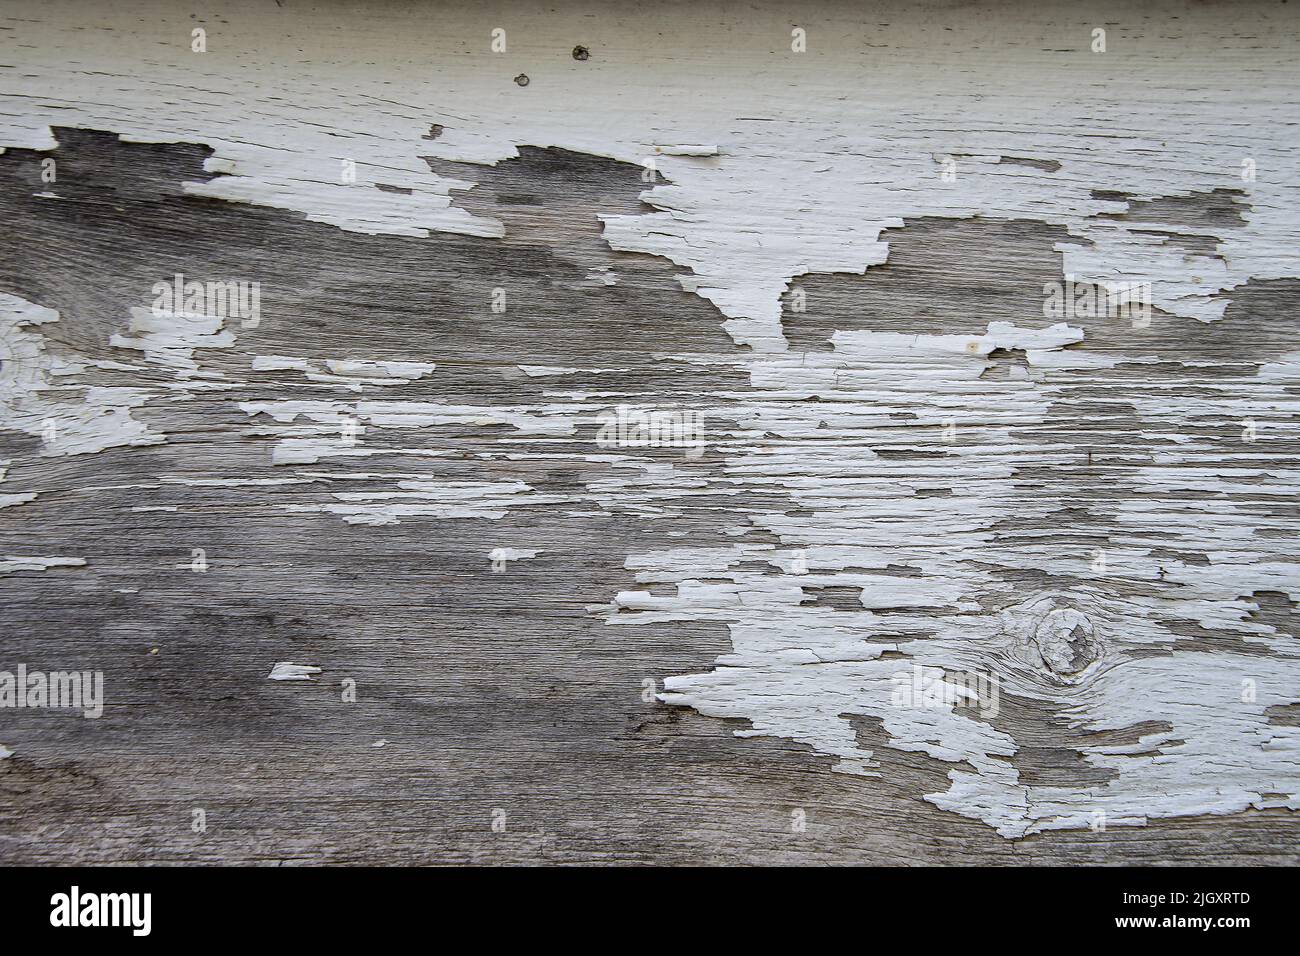 Abstract peeling old paint pattern on weathered wood surface Stock Photo